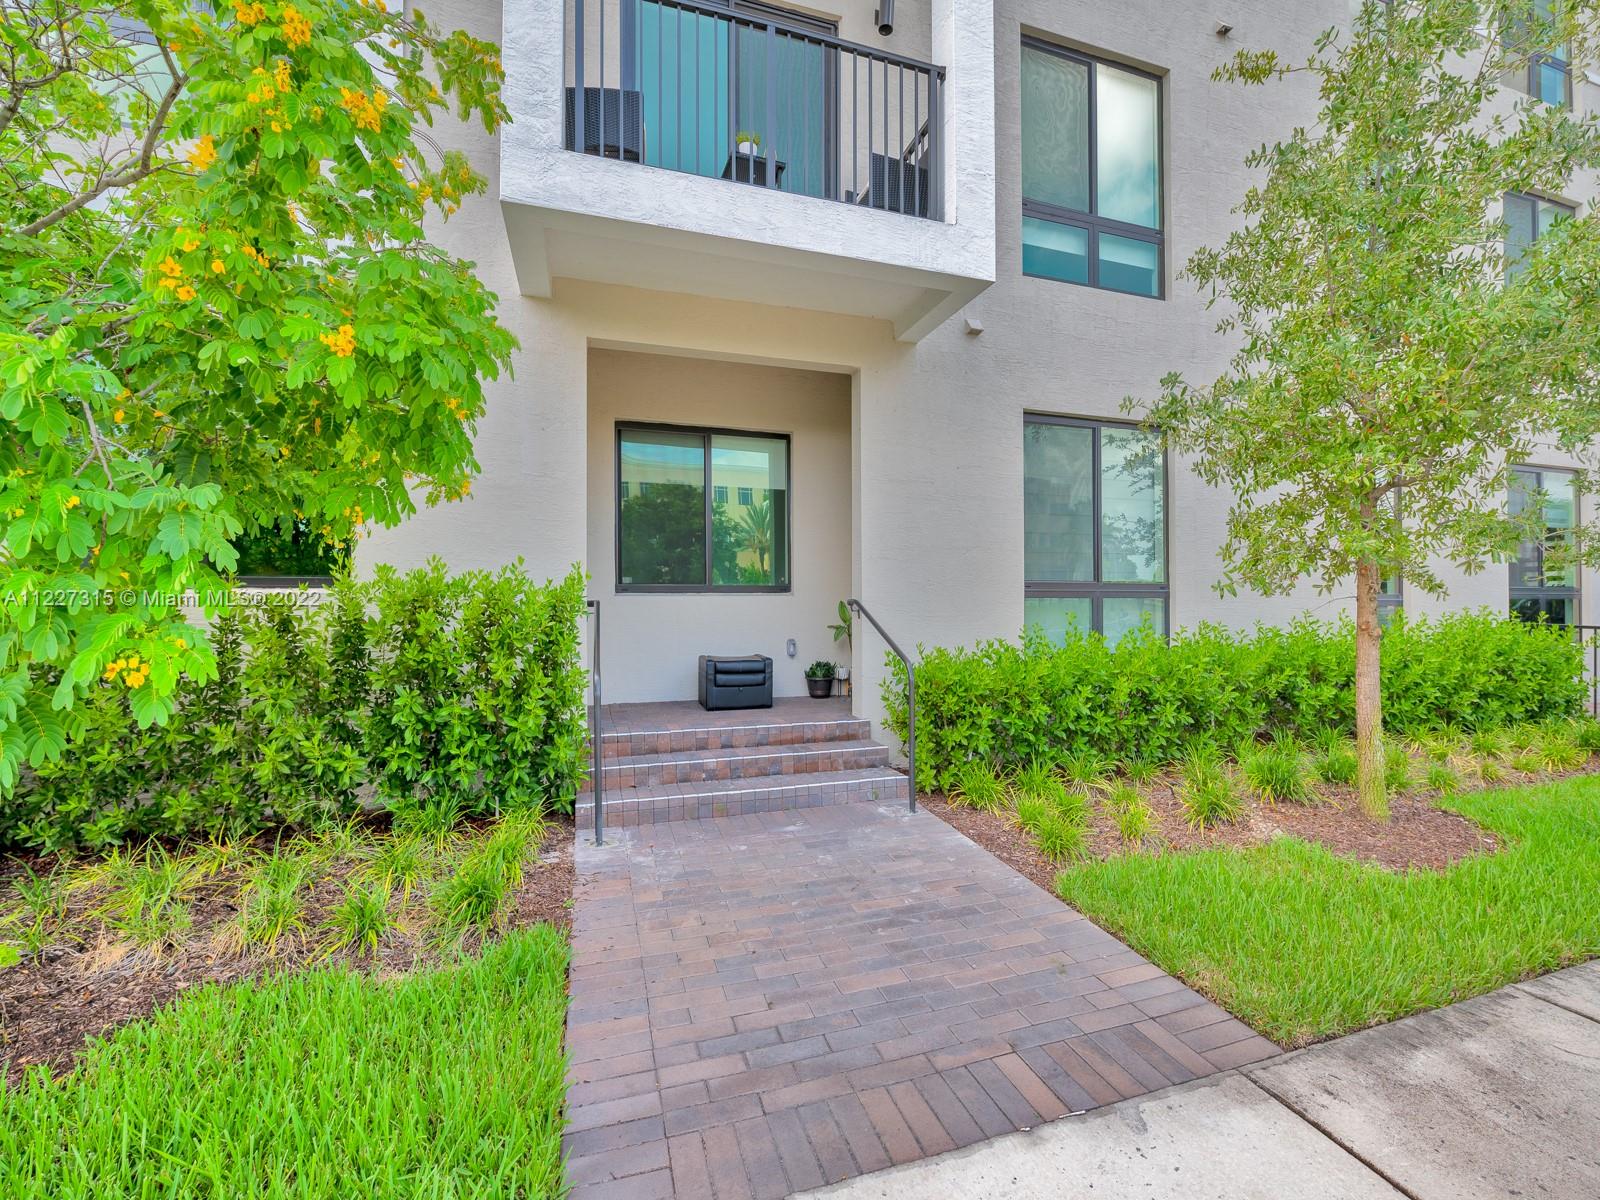 Photo 1 of Urbana at the residences 3 in Doral - MLS A11227315